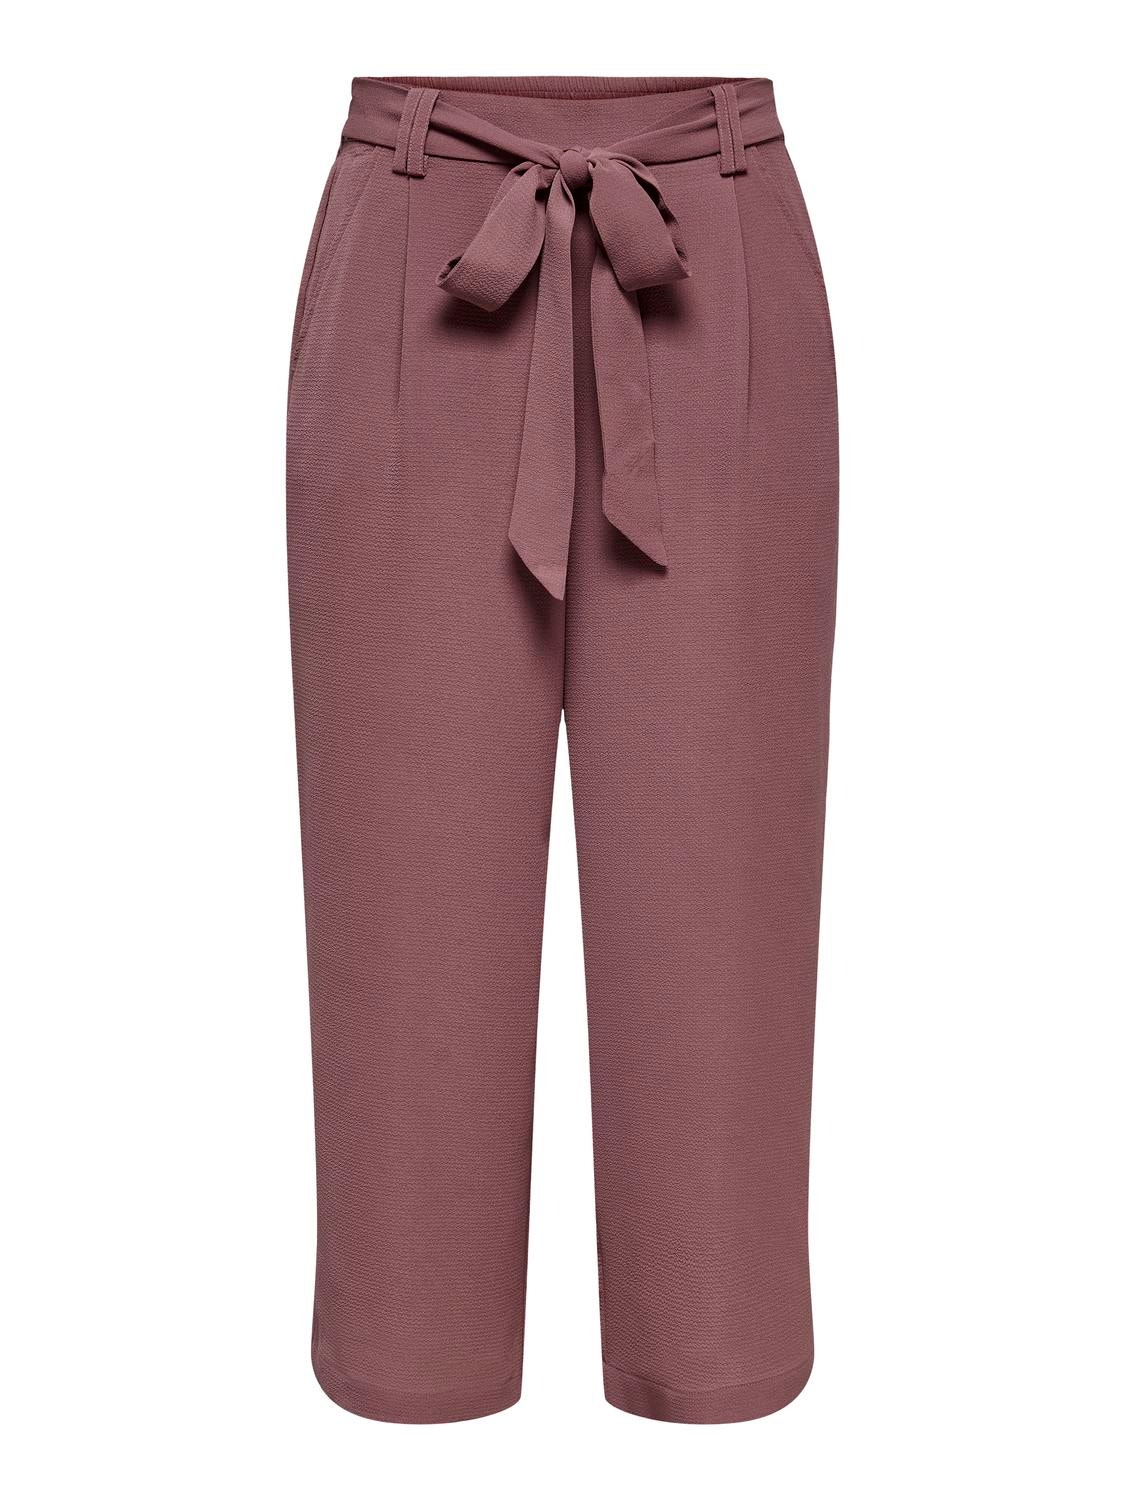 ONLY Palazzo trousers -Rose Brown - 15174974